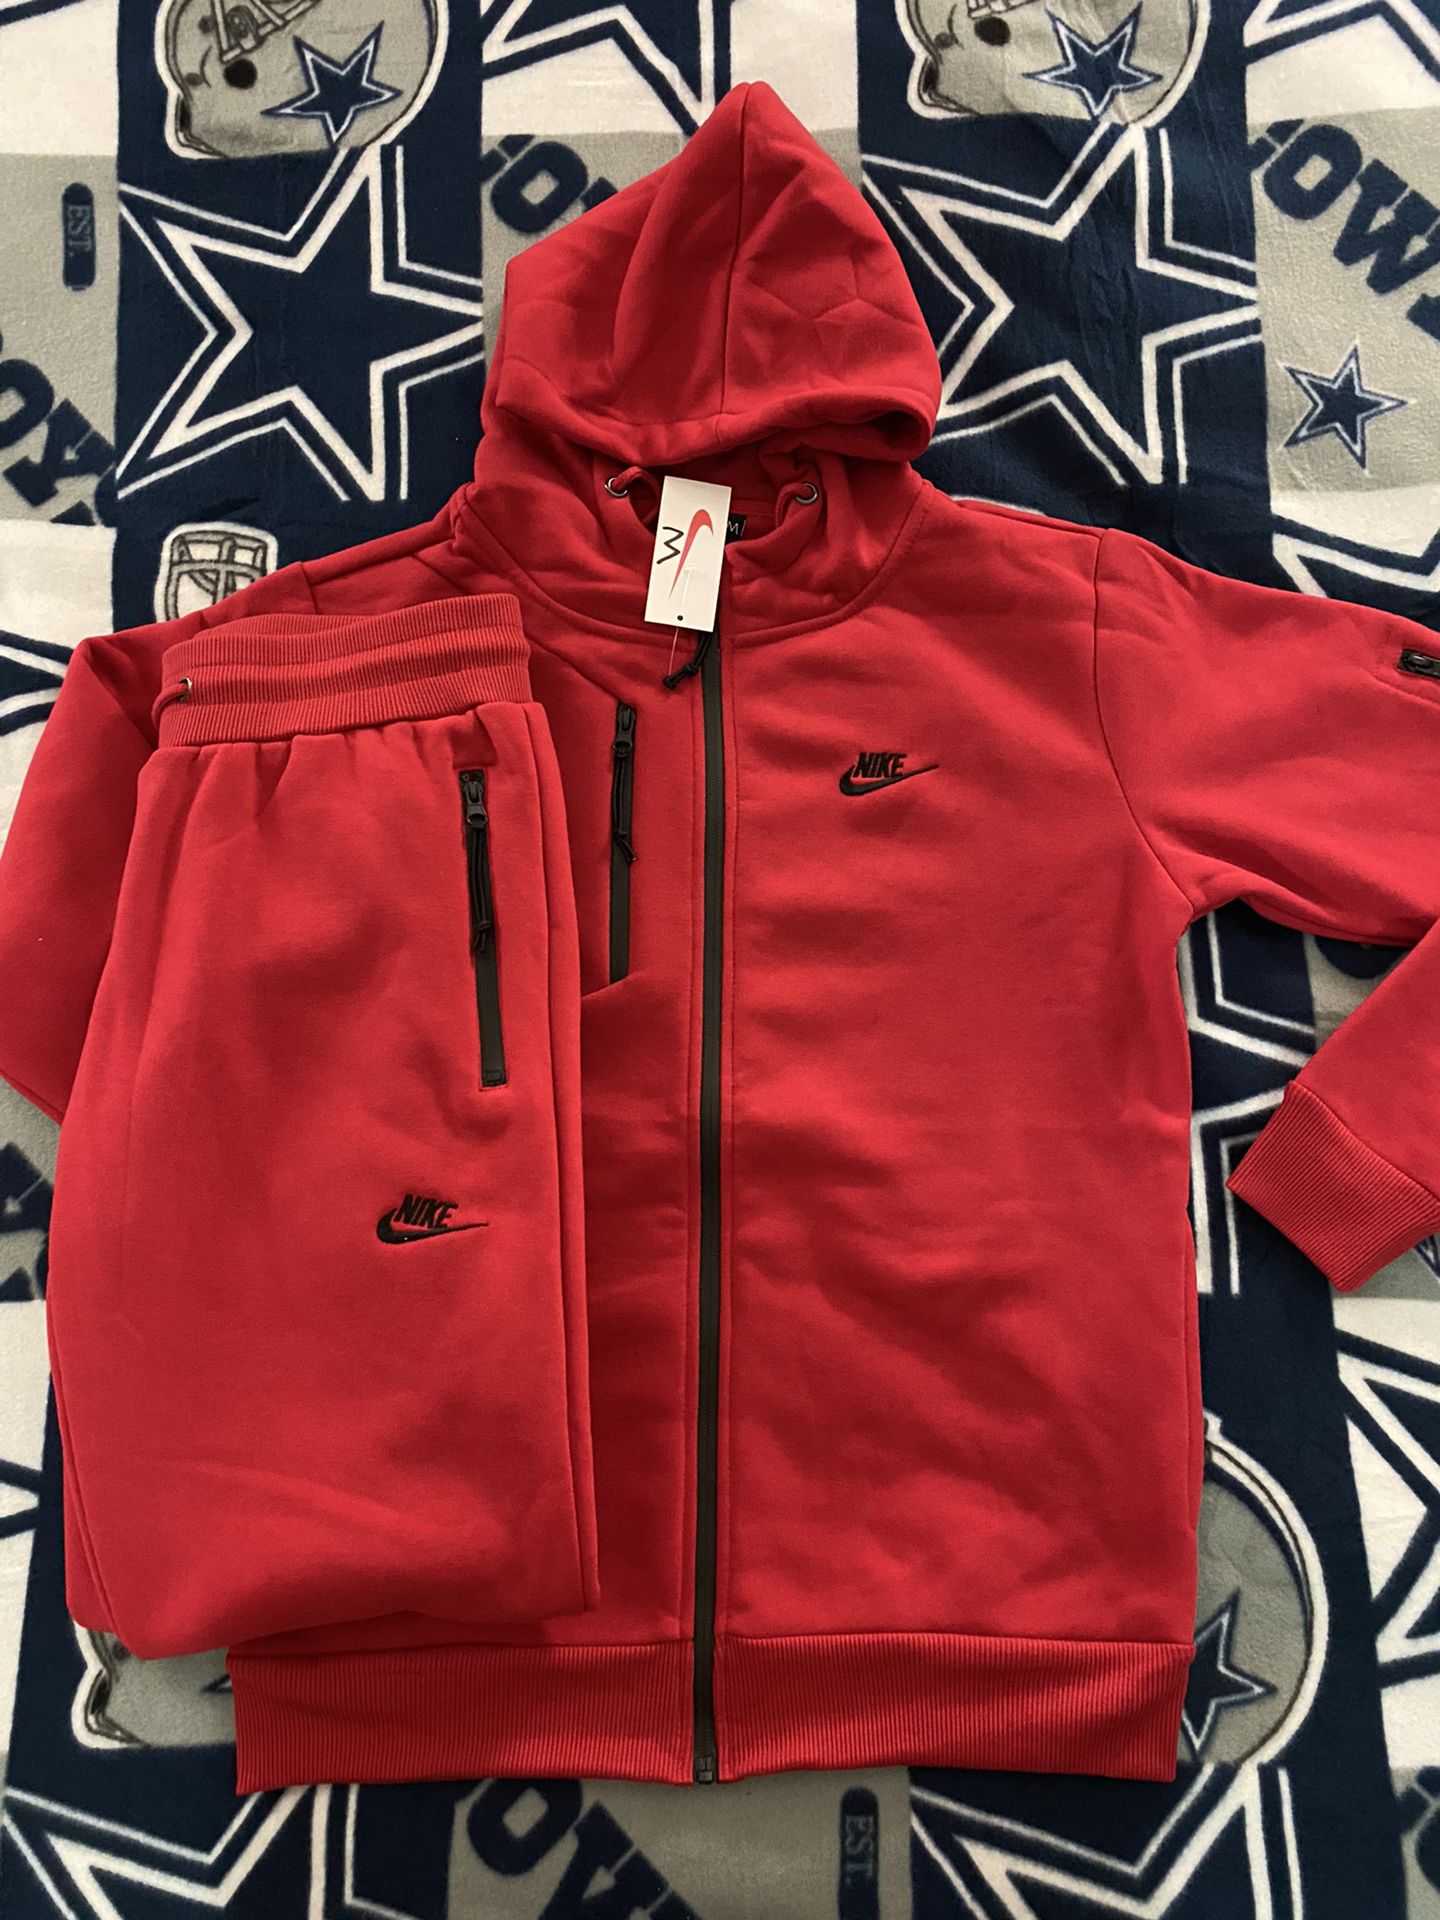 Red Sweat Suit Available In Small To 3X